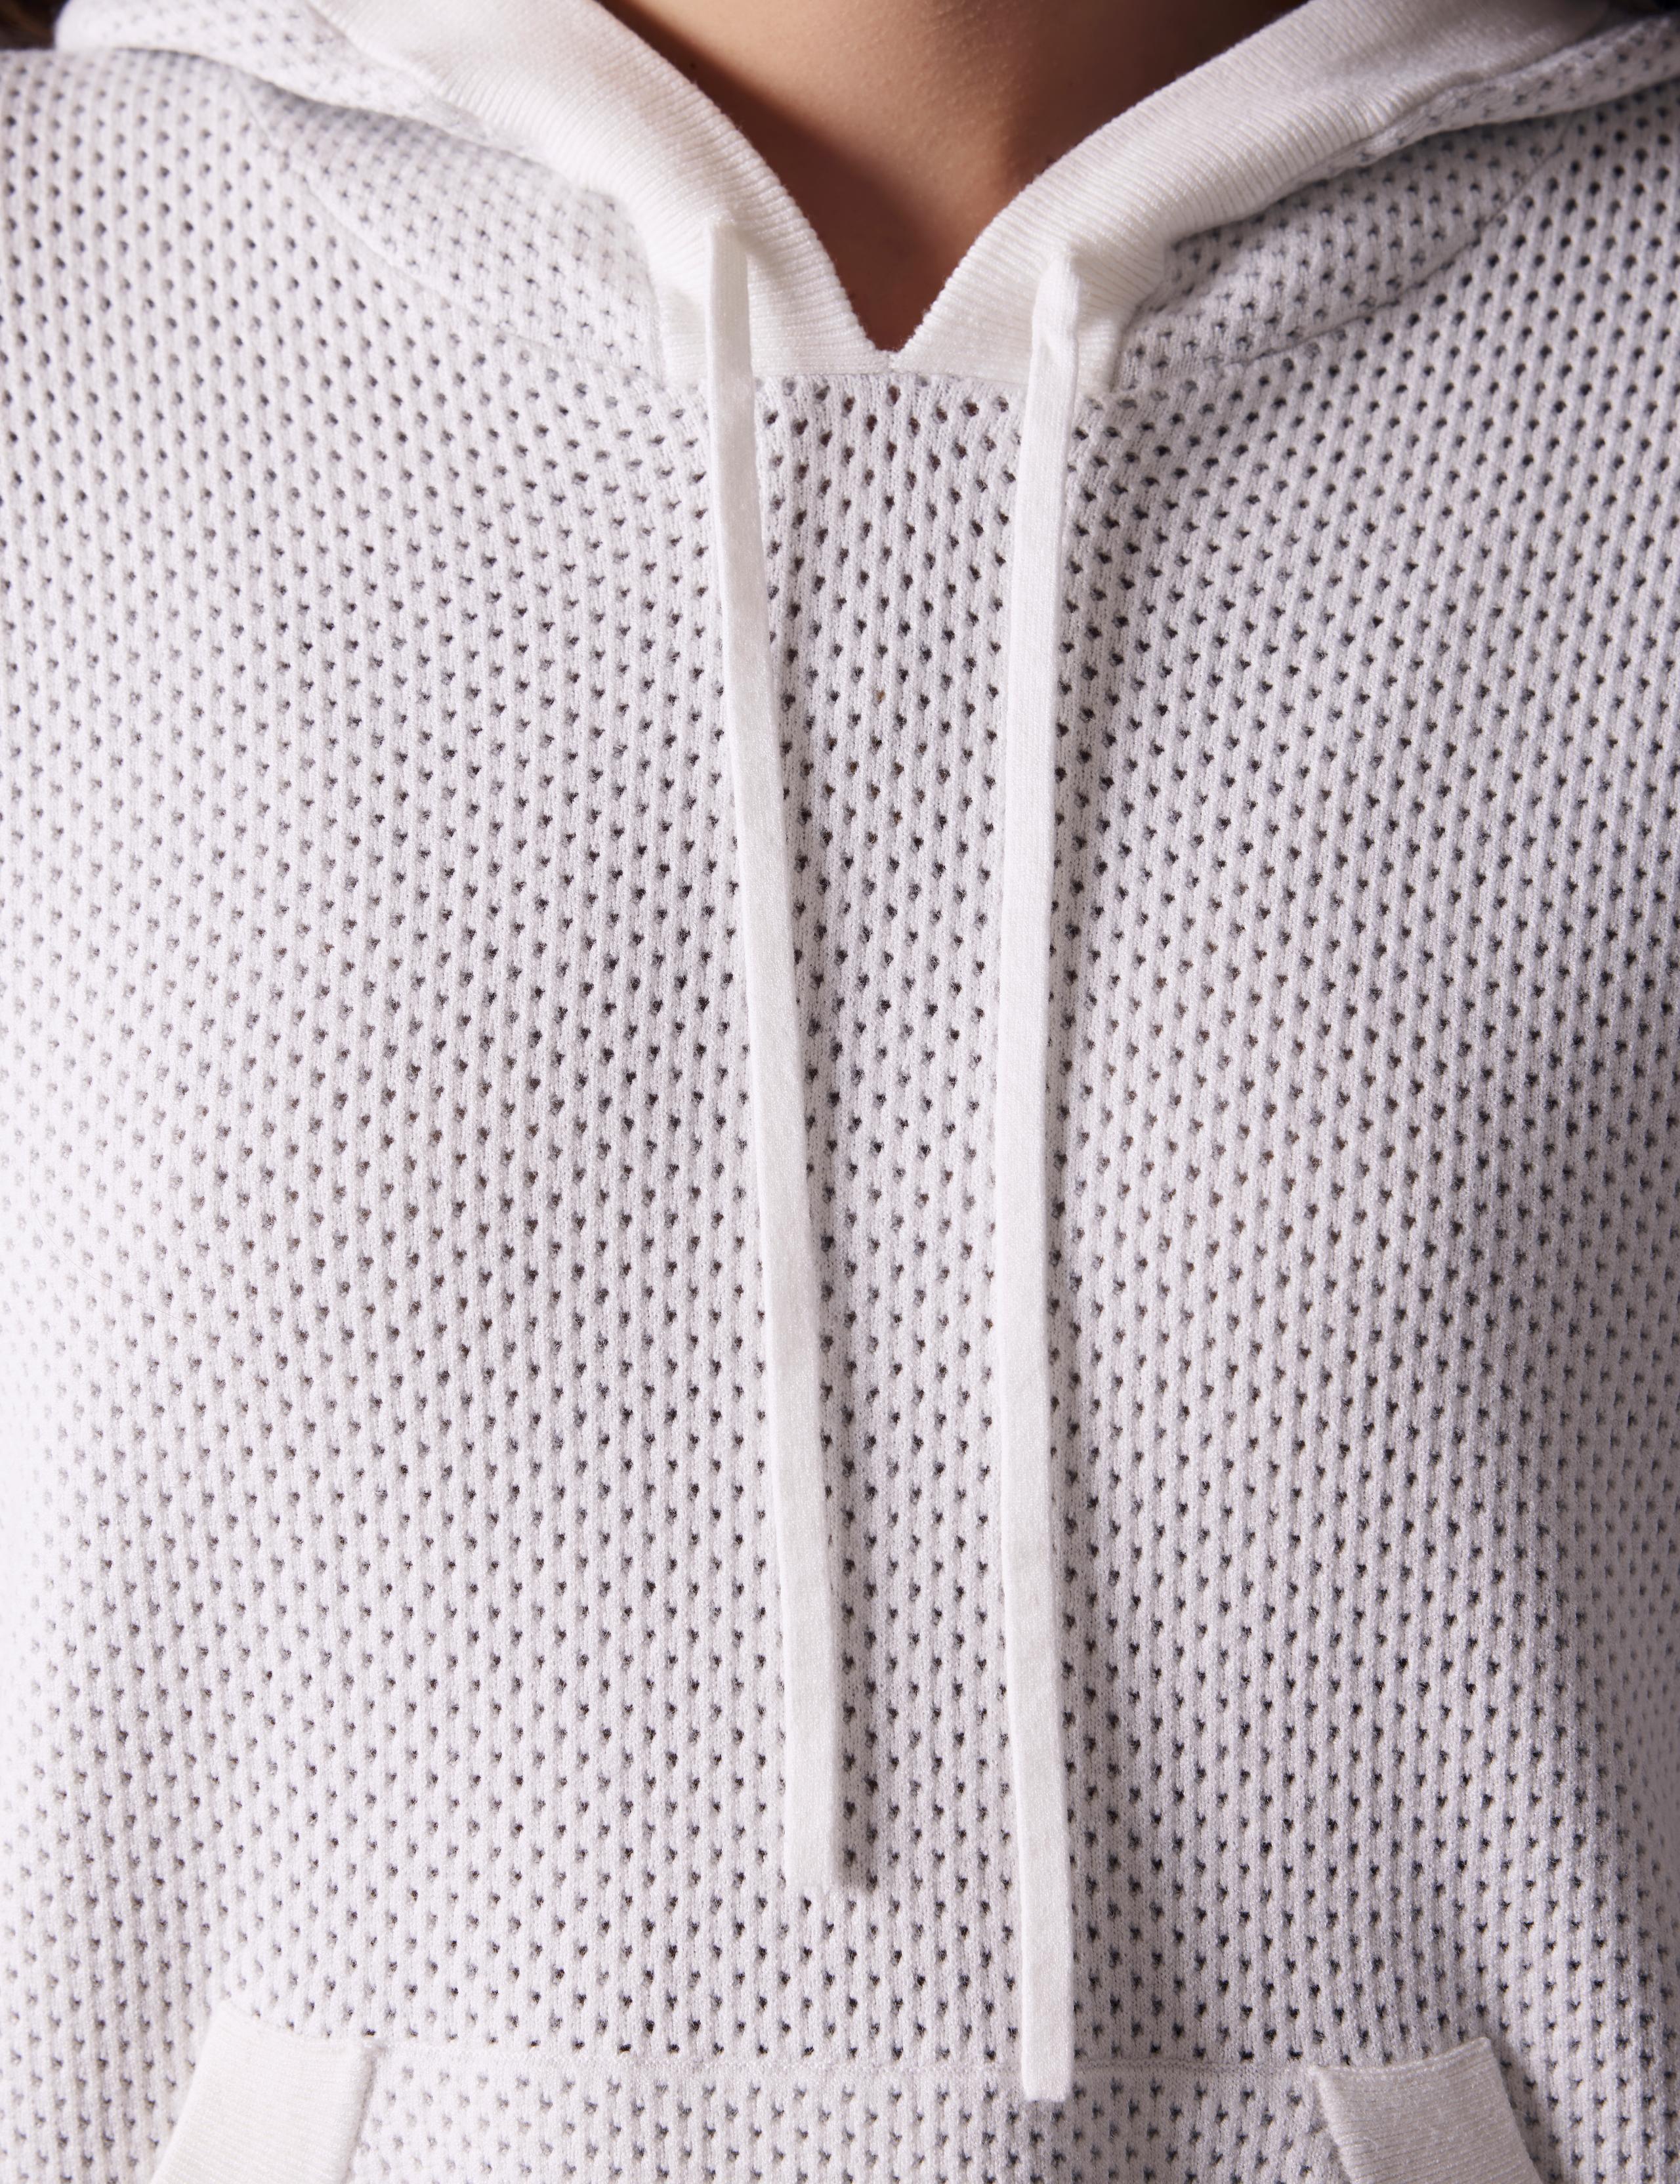 detailed shot of Baja Mesh Sweater's knitted drawcord.